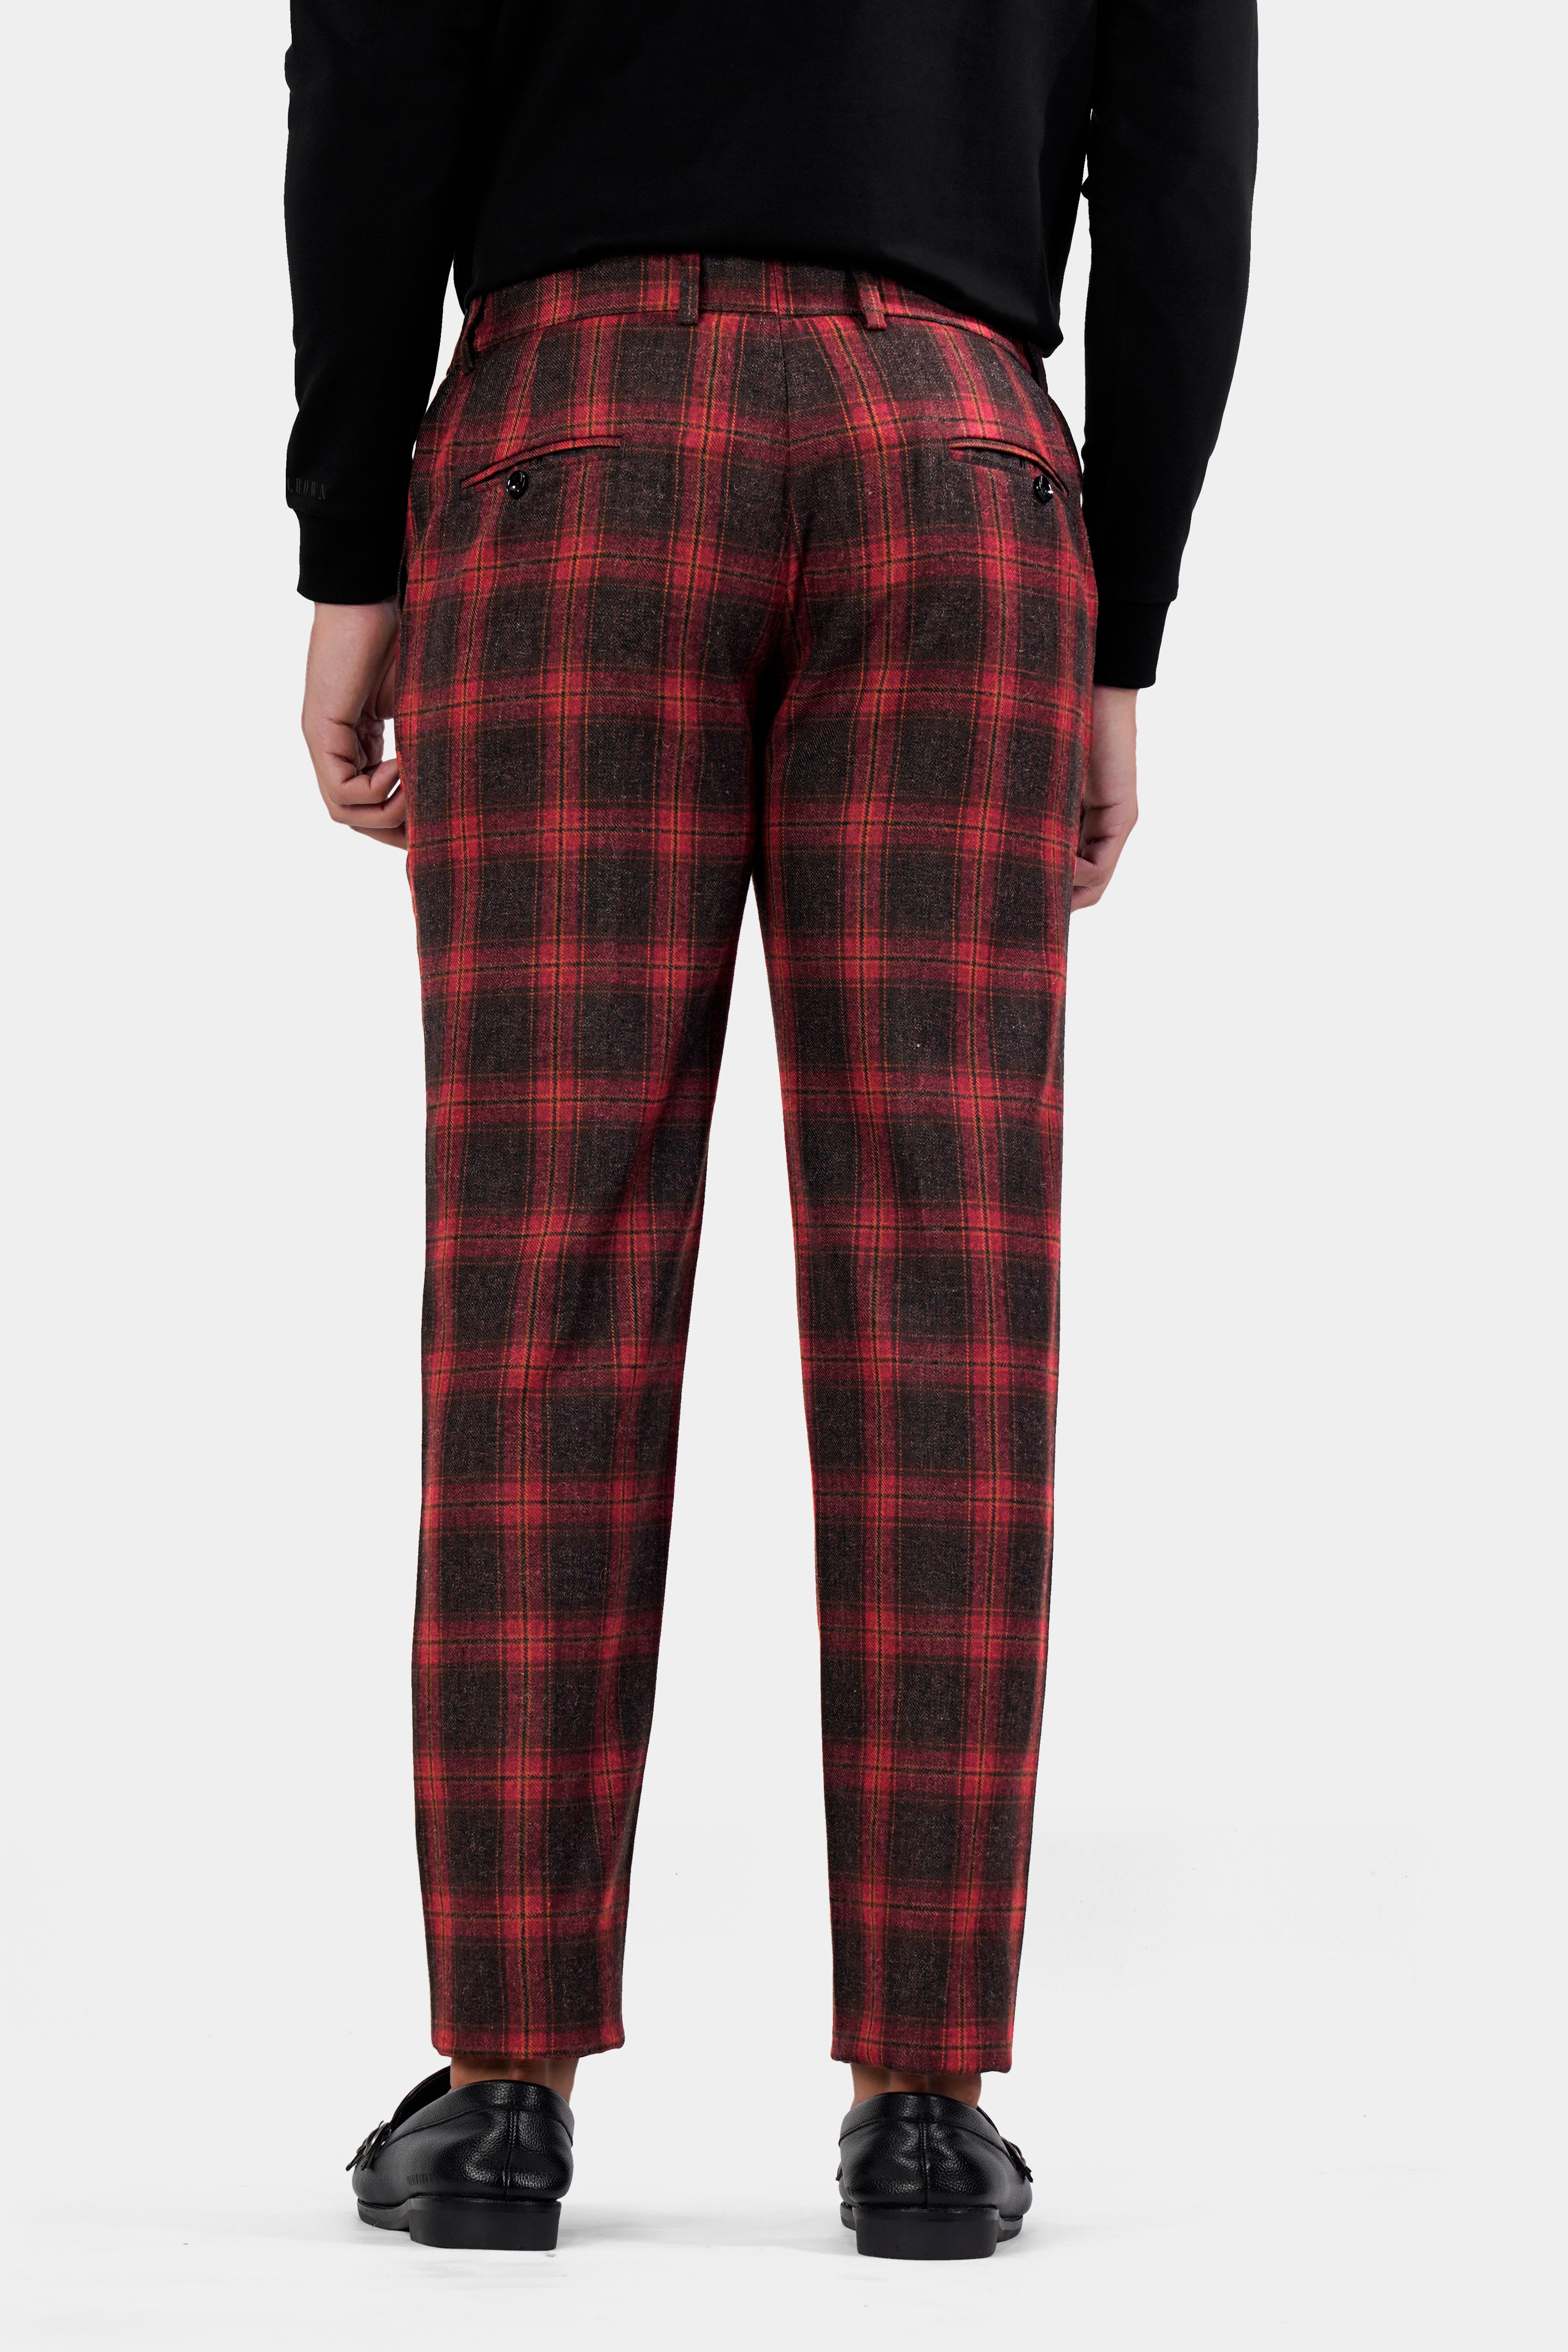 Claret Red and Walnut Brown Tweed Plaid Pant T2918-SW-28, T2918-SW-30, T2918-SW-32, T2918-SW-34, T2918-SW-36, T2918-SW-38, T2918-SW-40, T2918-SW-42, T2918-SW-44